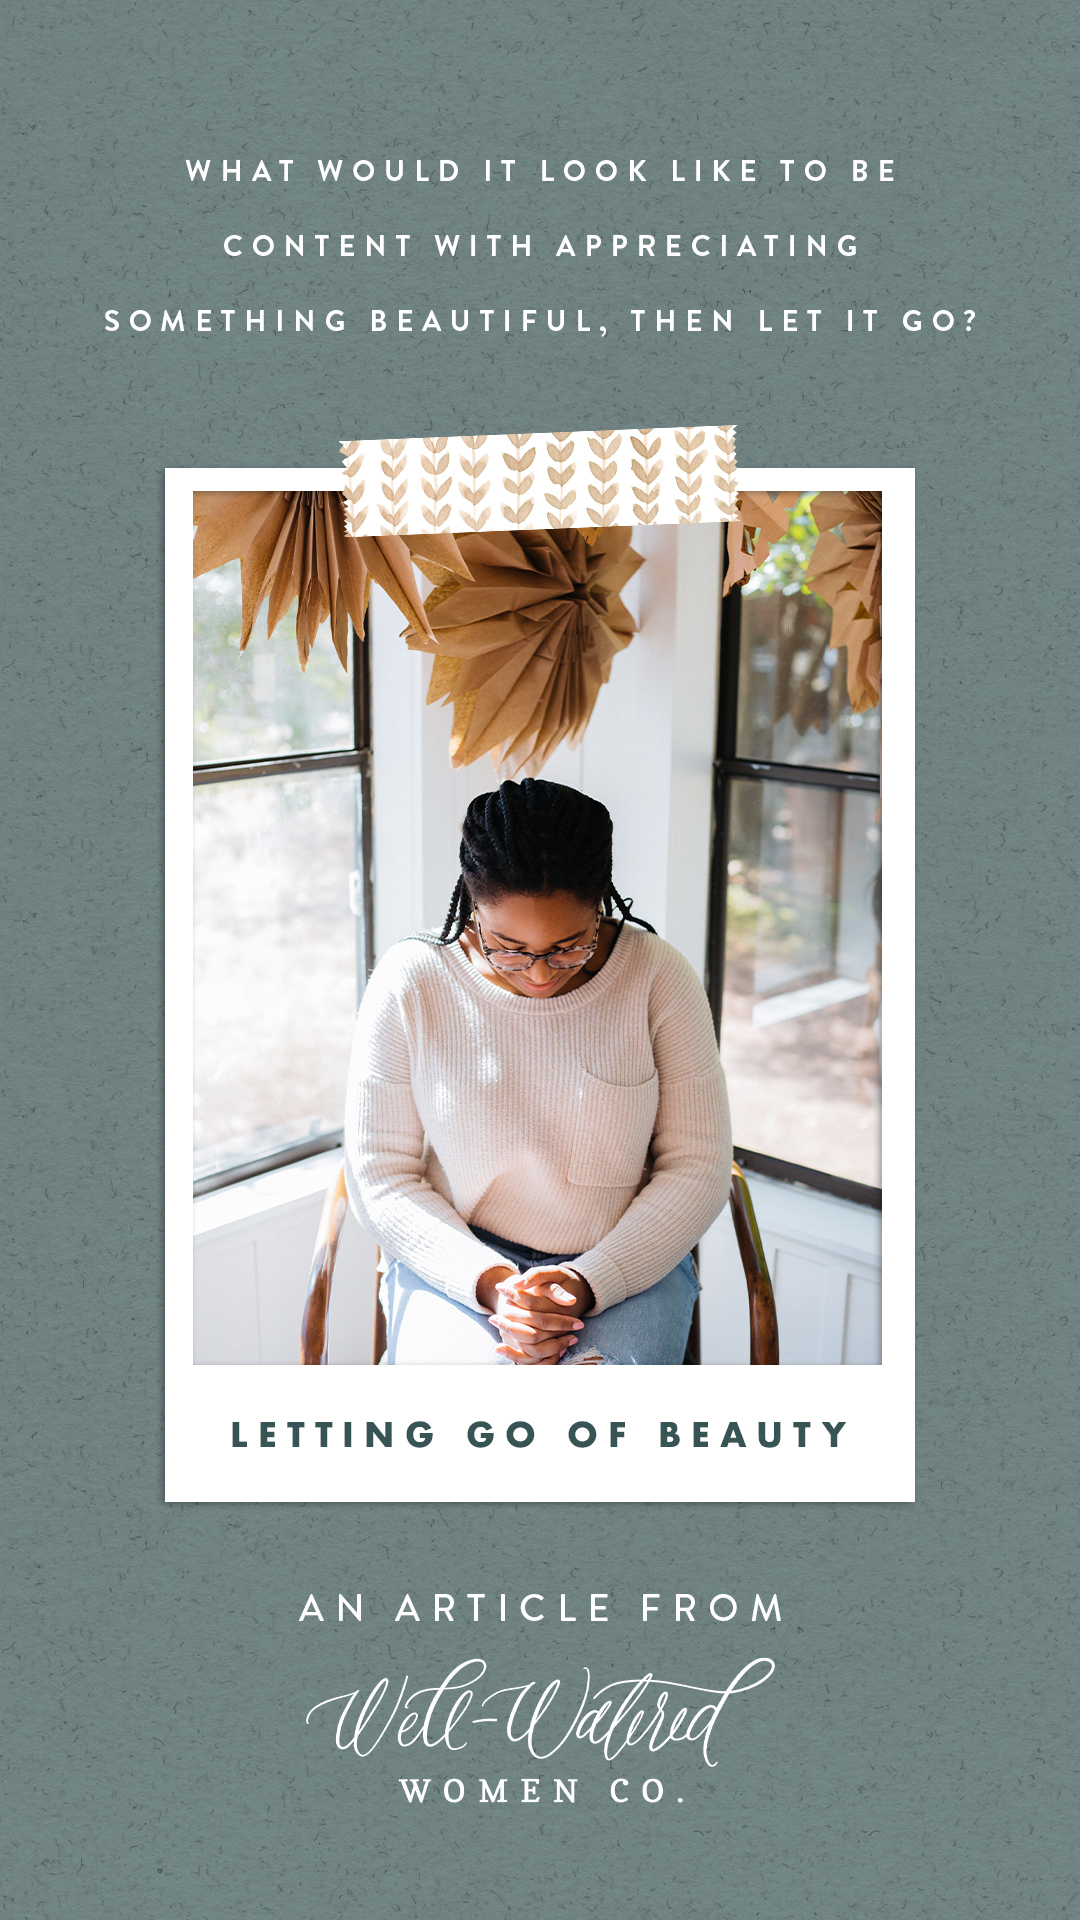 Letting Go of Beauty-An Article by Well-Watered Women